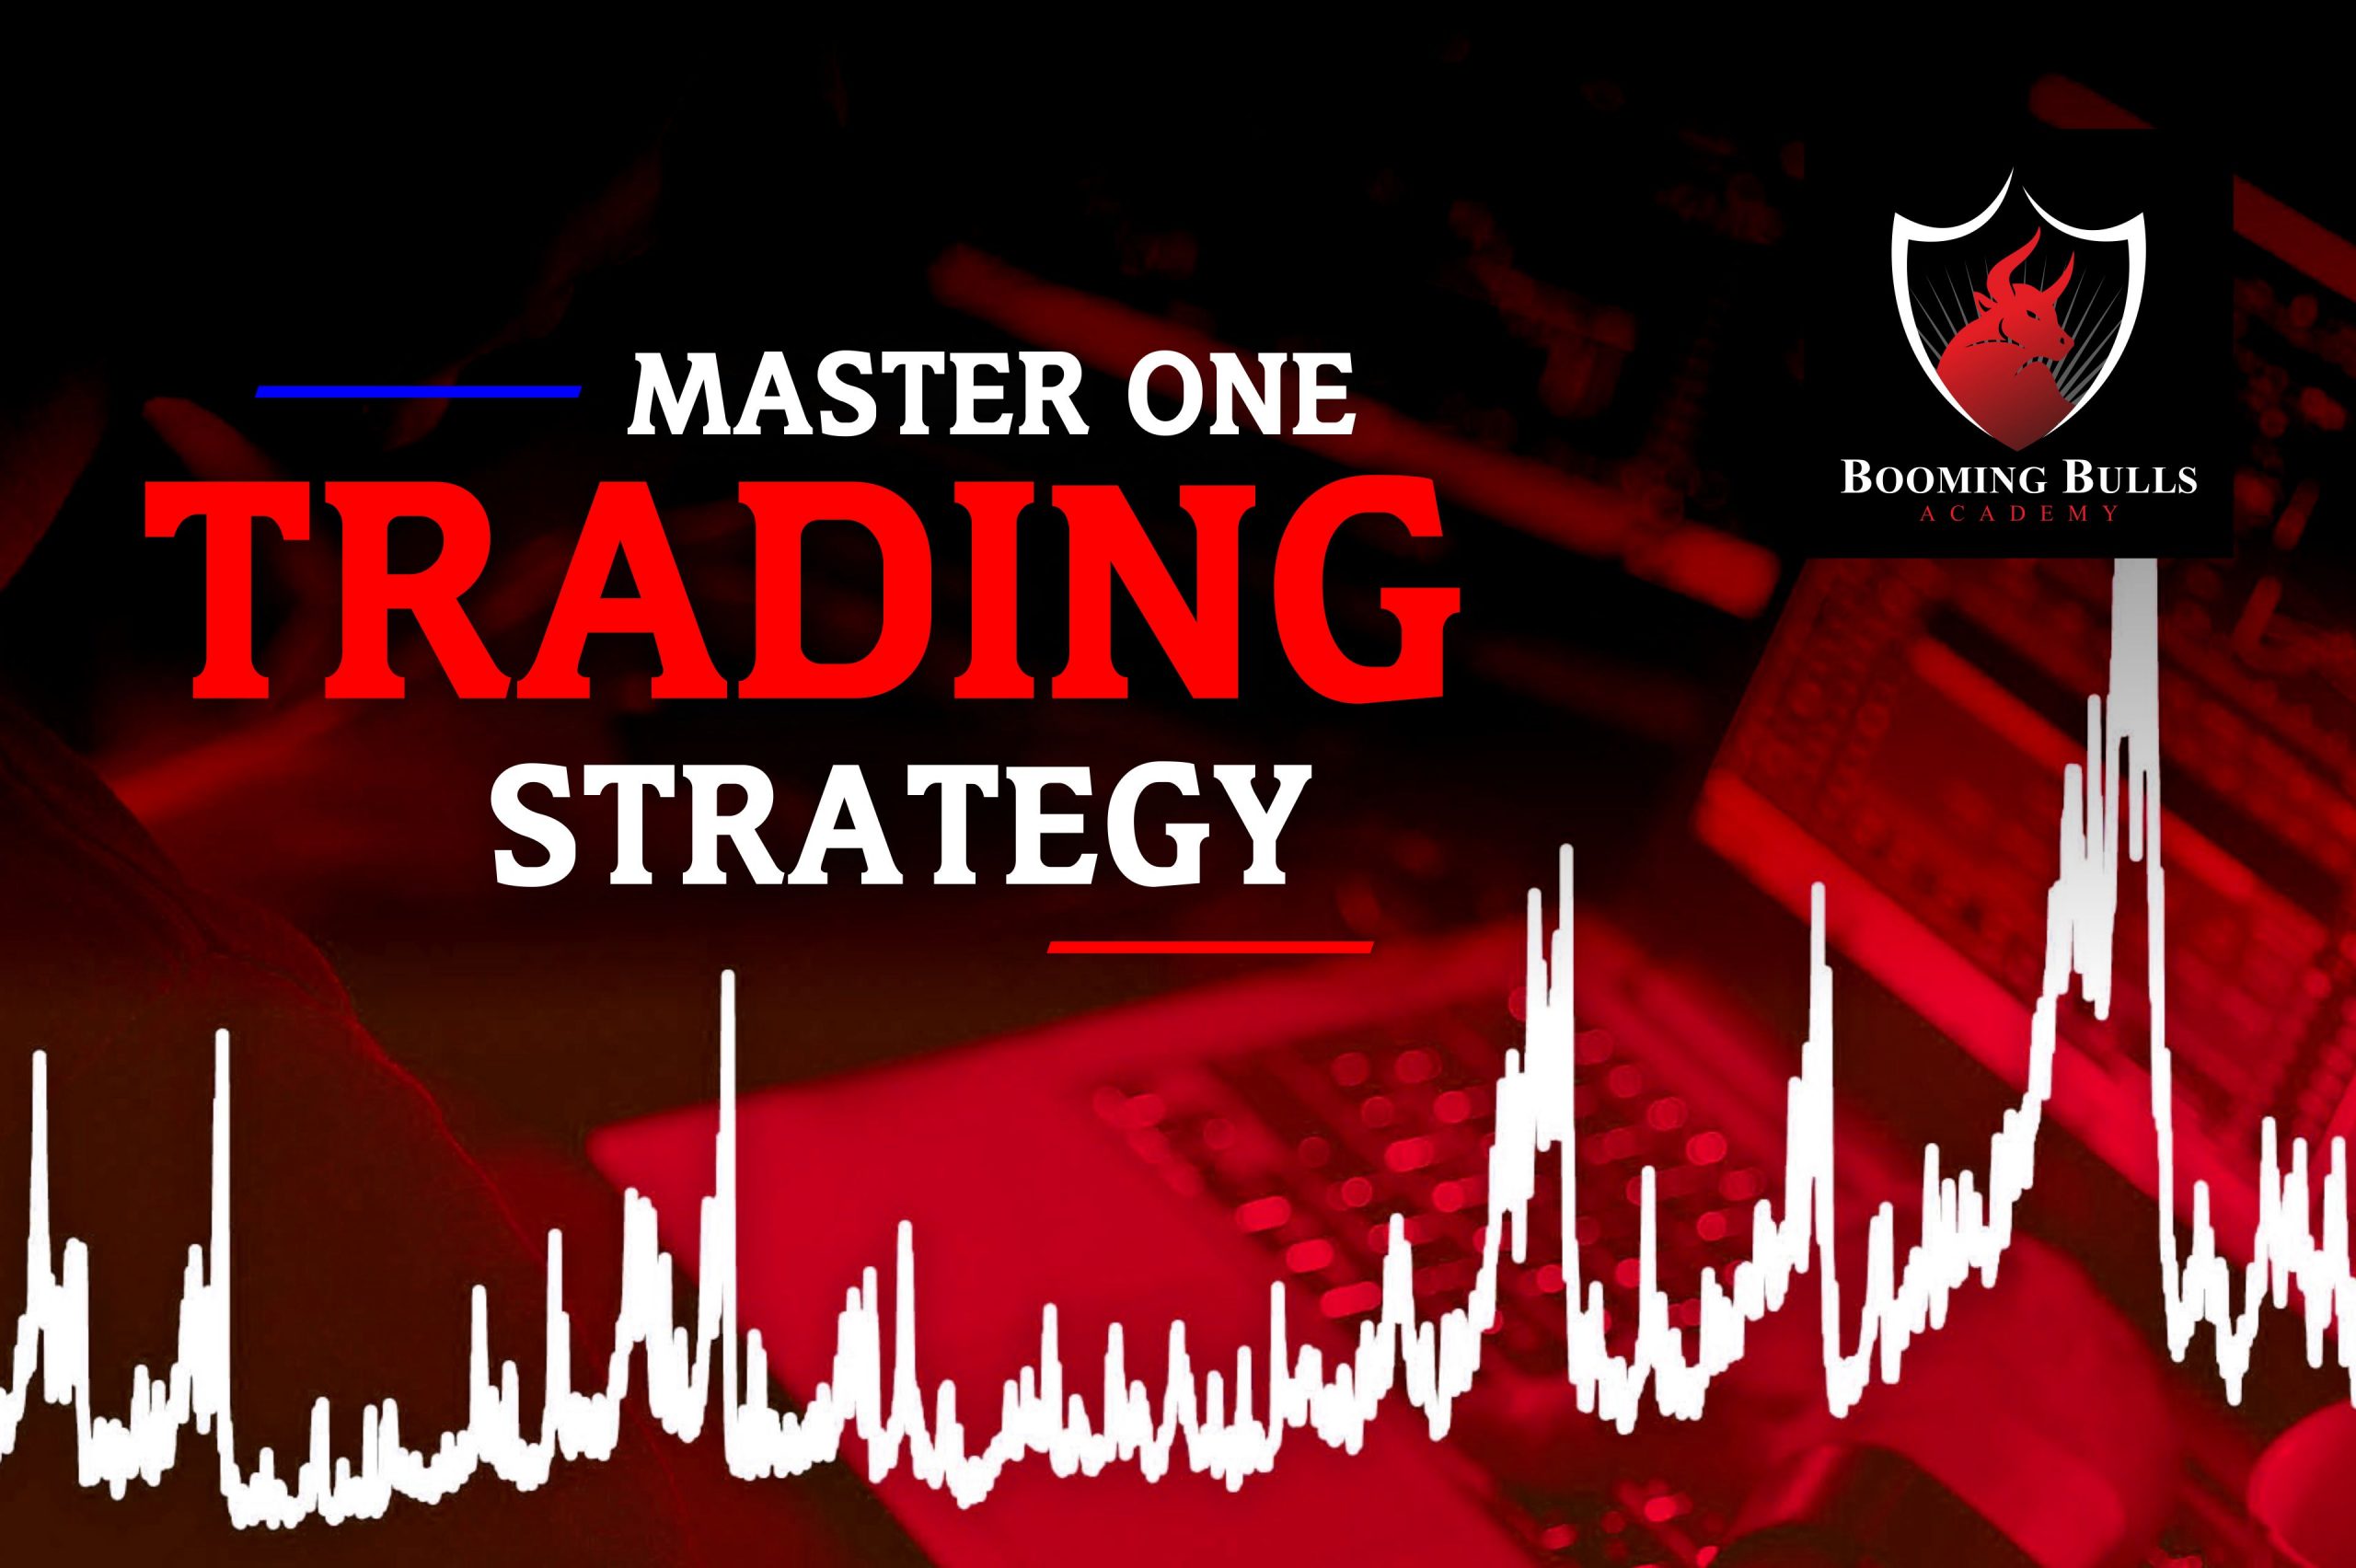 Master One Trading Strategy